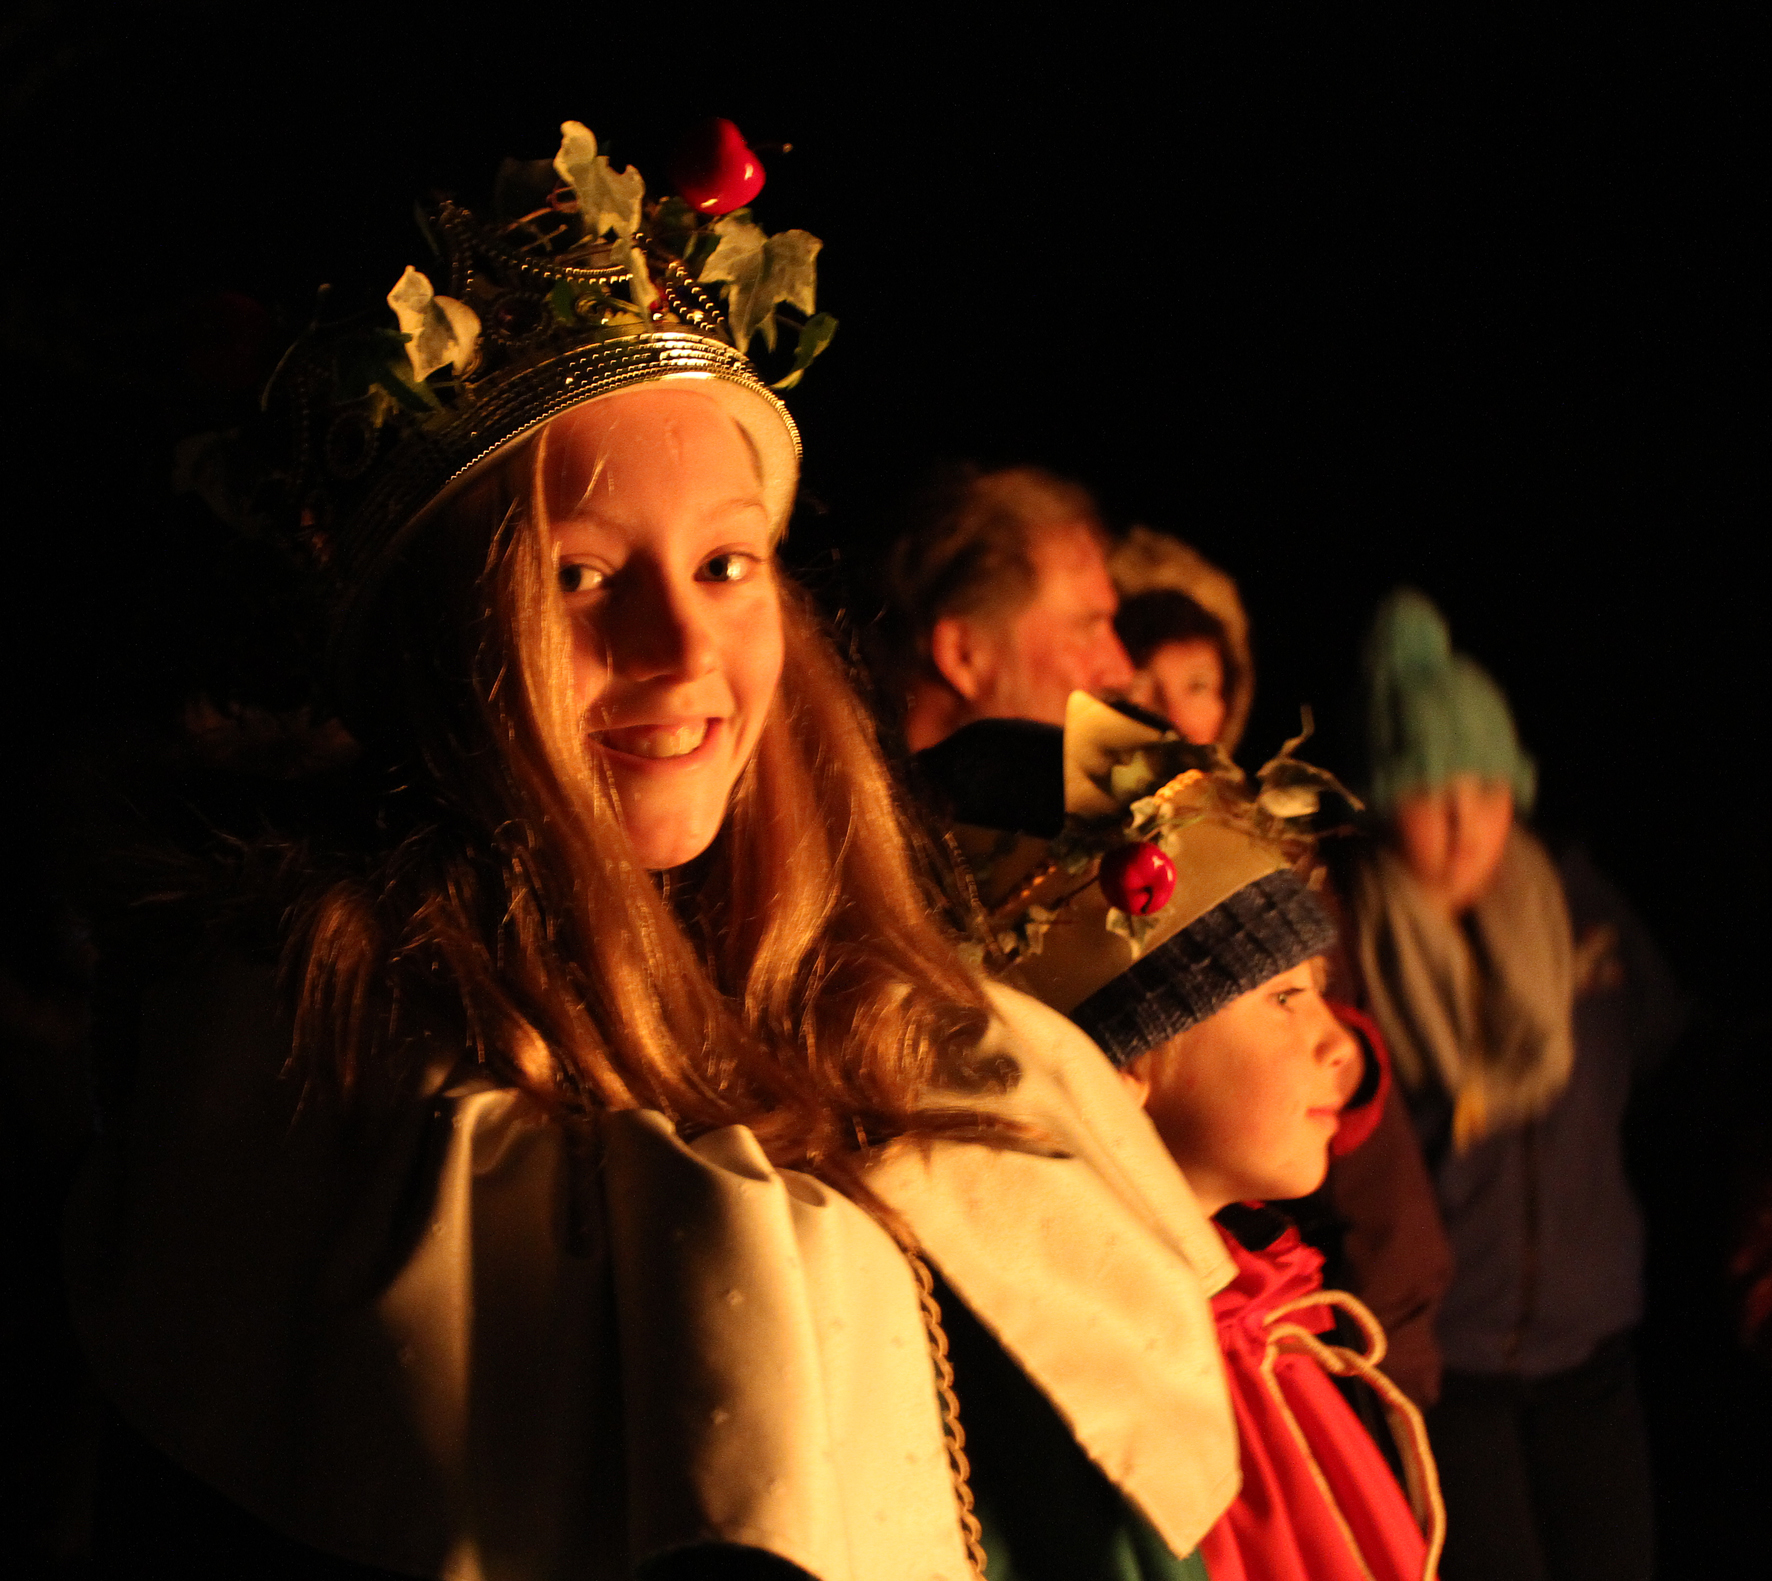 a young girl facing the camera smiling with a gold crown wrapped in ivy leaves - the Wassail crowned queen